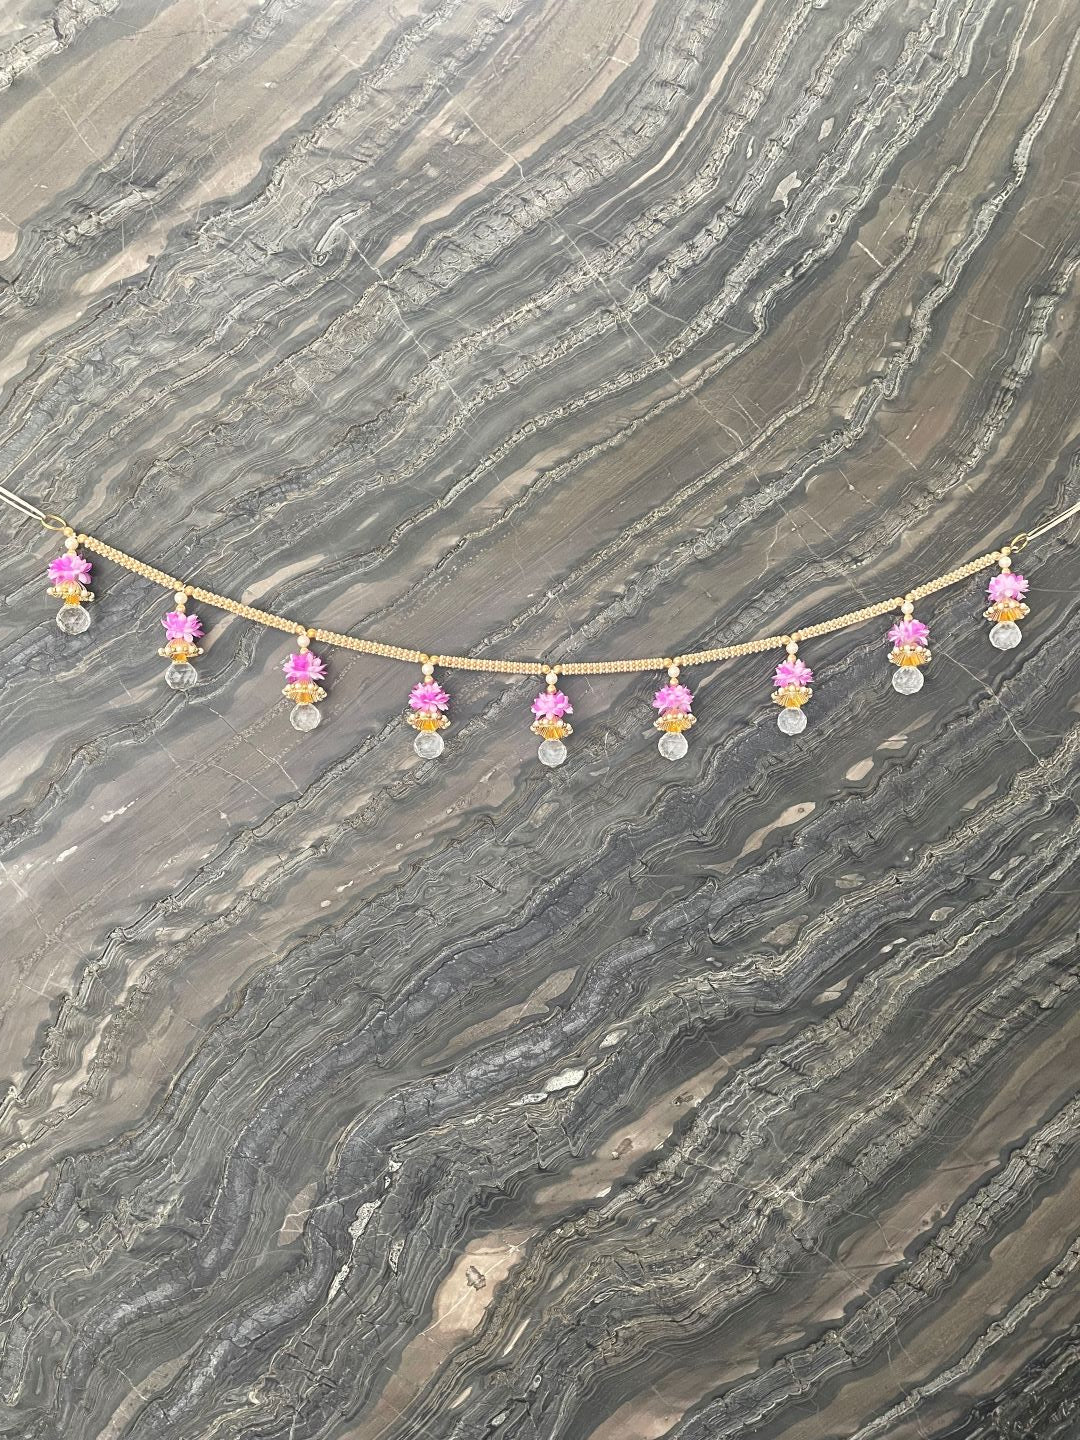 Gold & Pearl Beads With Purple flower Toran For Door Hangings Diwali Decoration with Hanging Crystal Balls